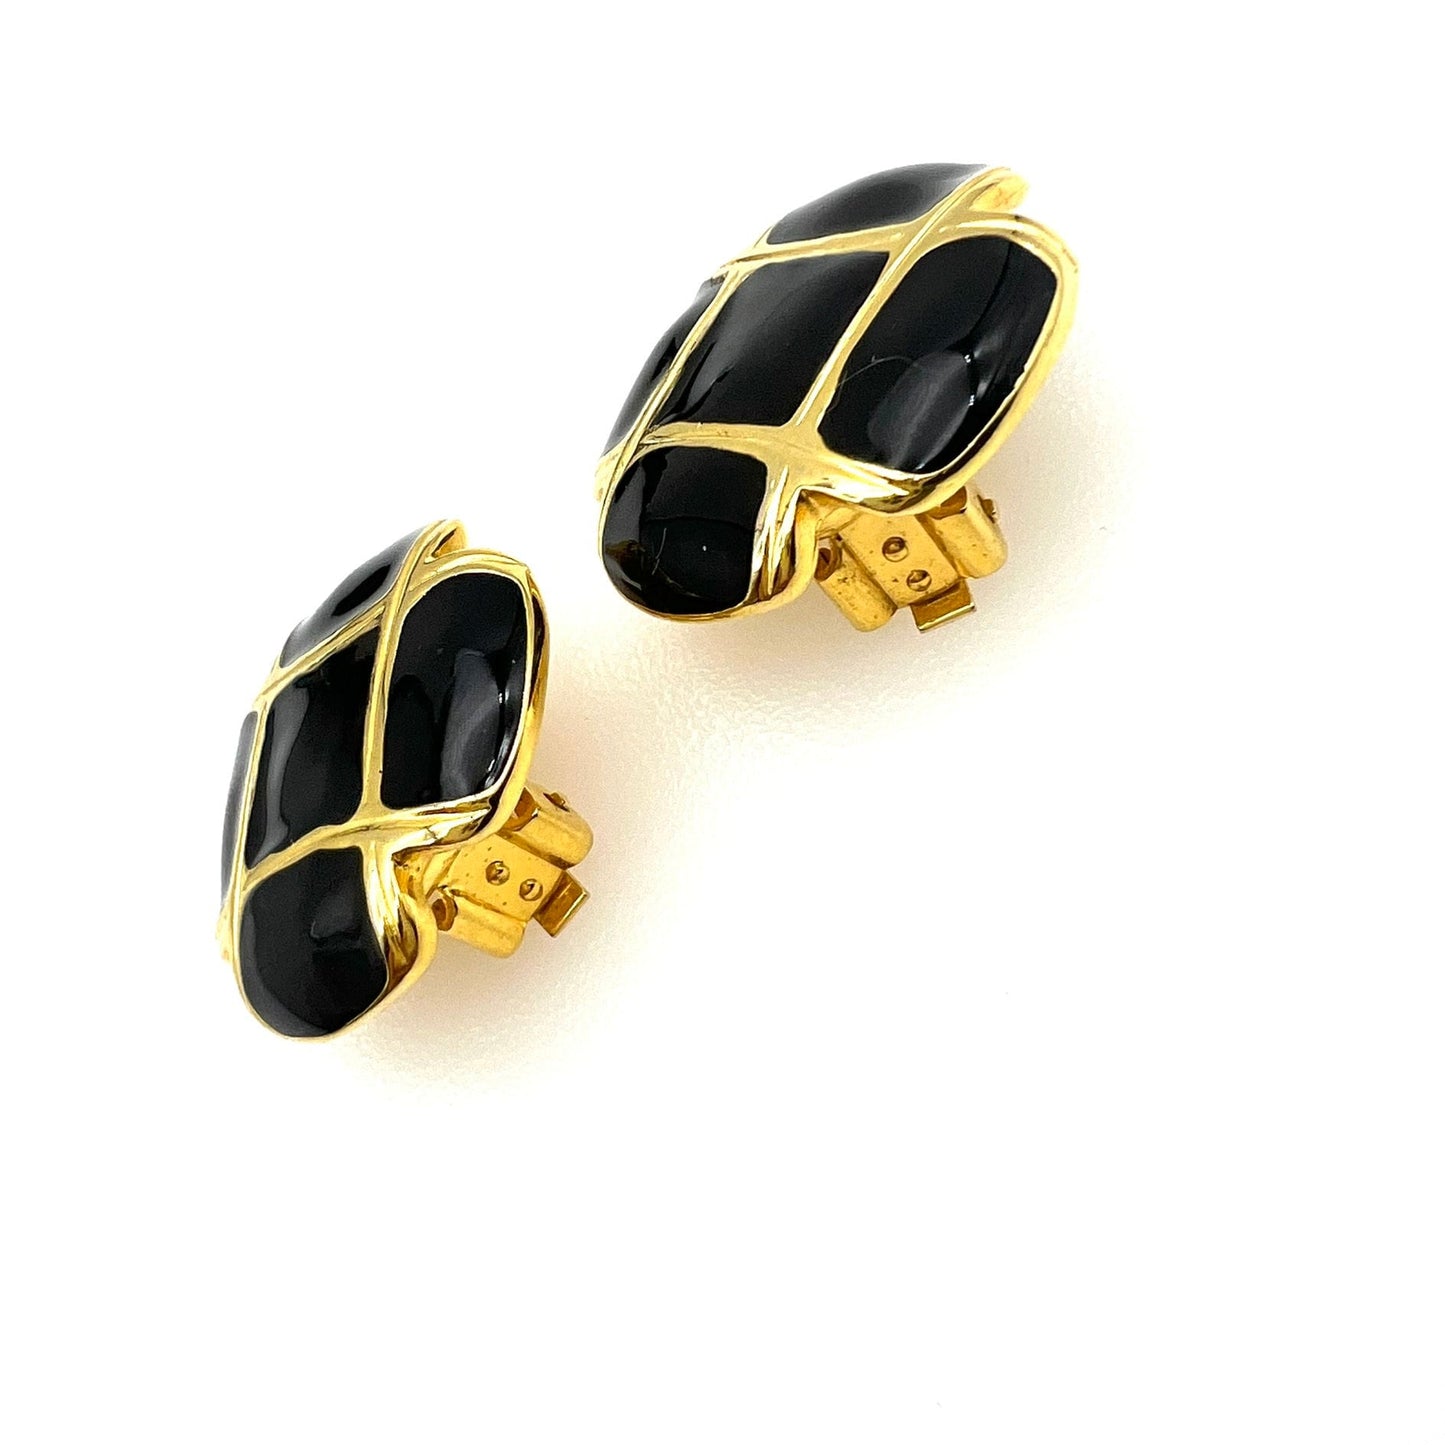 Unsigned Round Gold Plated and Black Enamel Cross Clip On Earrings